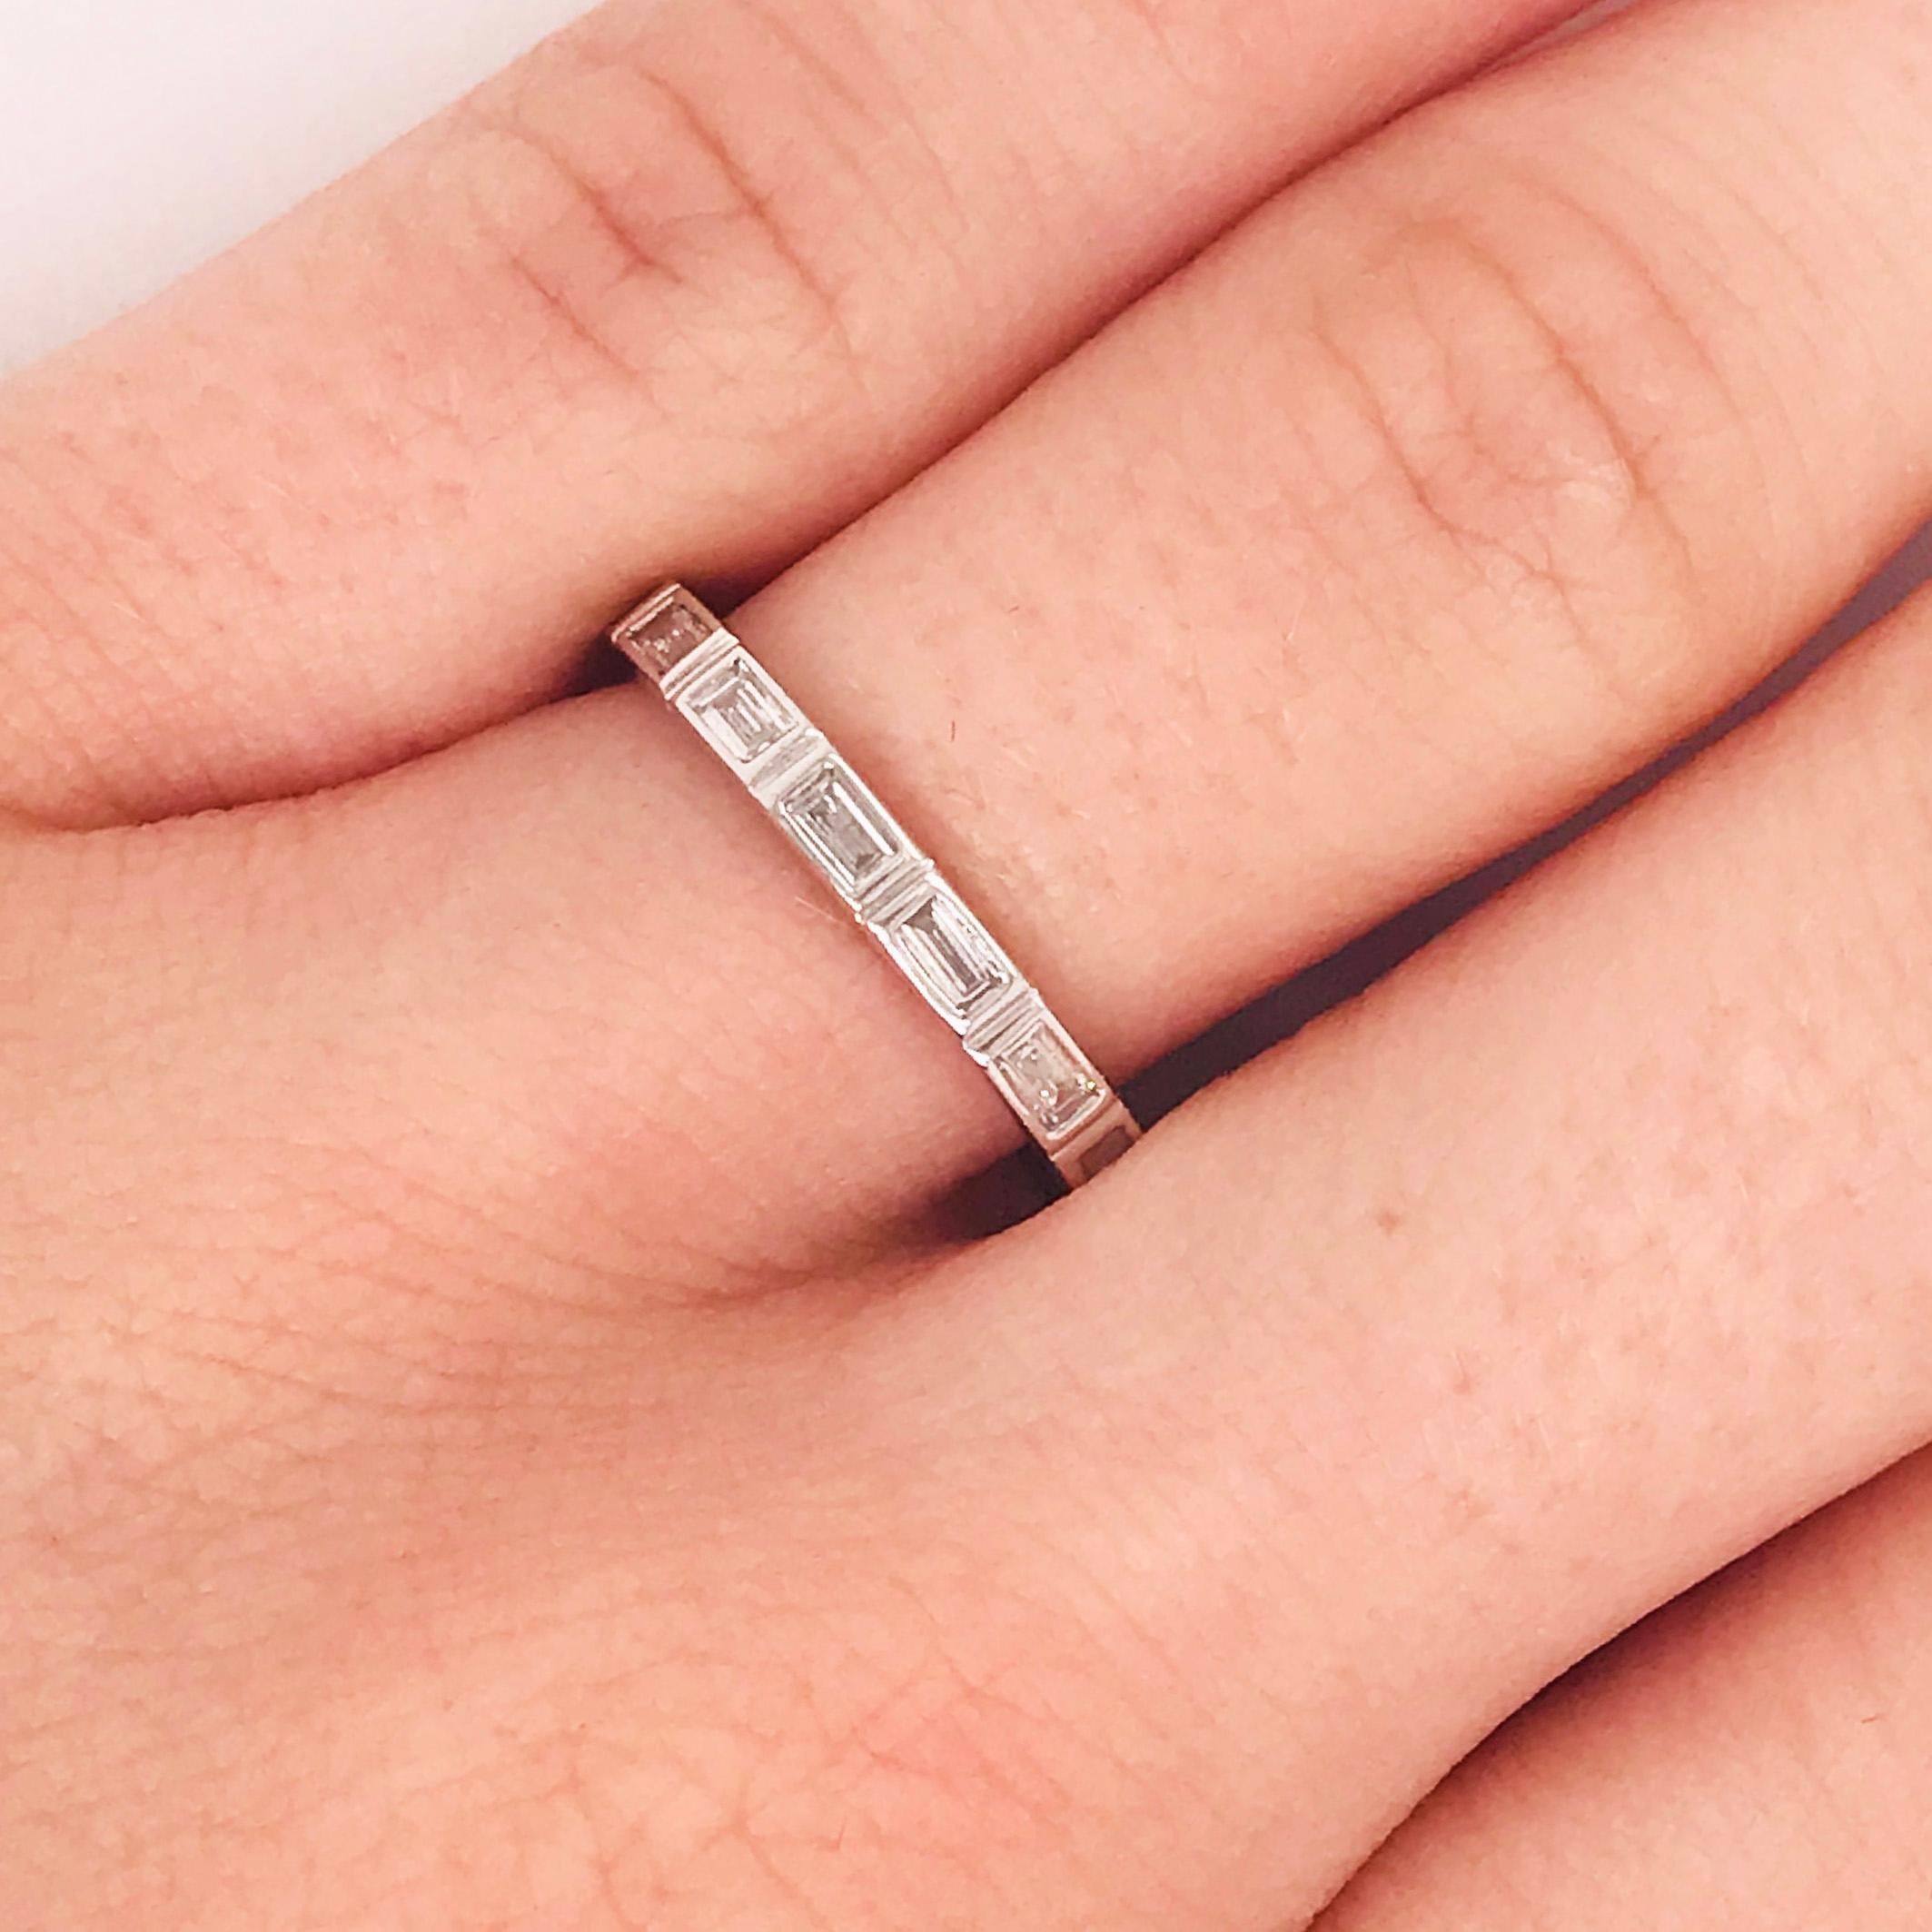 This modern diamond baguette band is a clean, sleek design. With natural baguette diamonds set East to West in bezel settings. This band has a seamless, bright white look! The diamonds are G-H color and VS-1 Clarity, very clear and very white! The